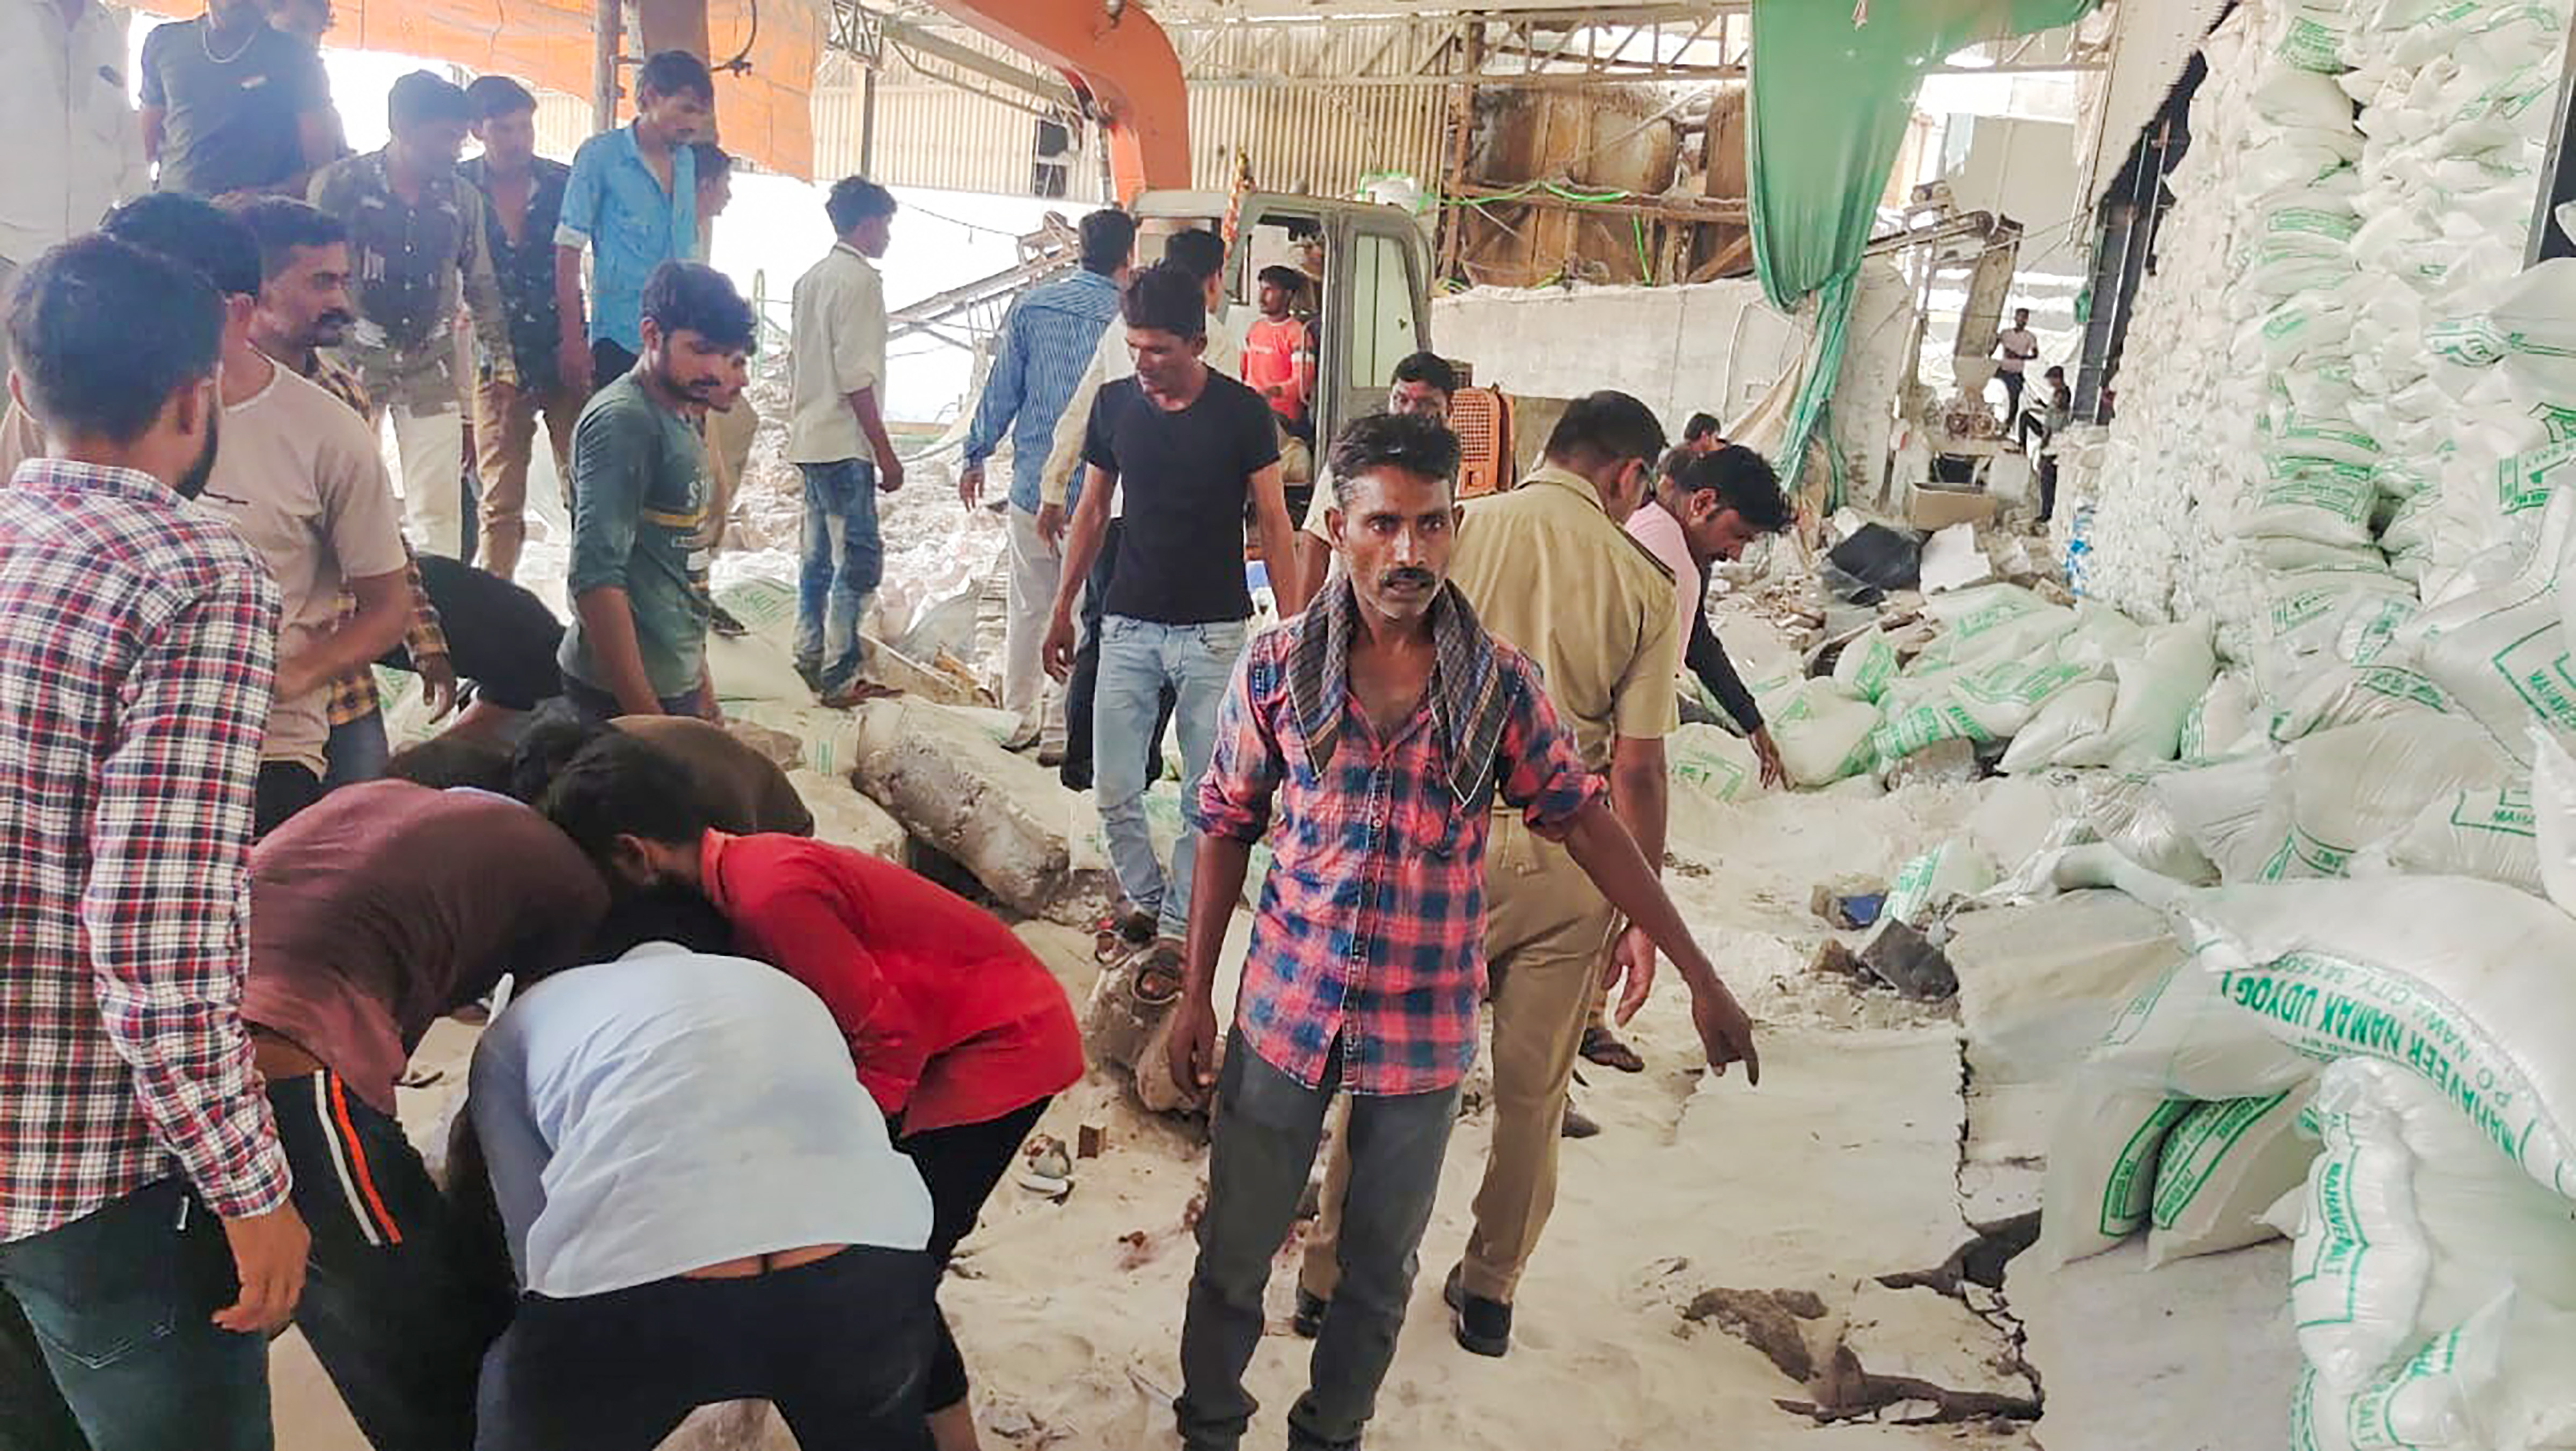 12 labourers killed in wall collapse at factory in Gujarat's Morbi district